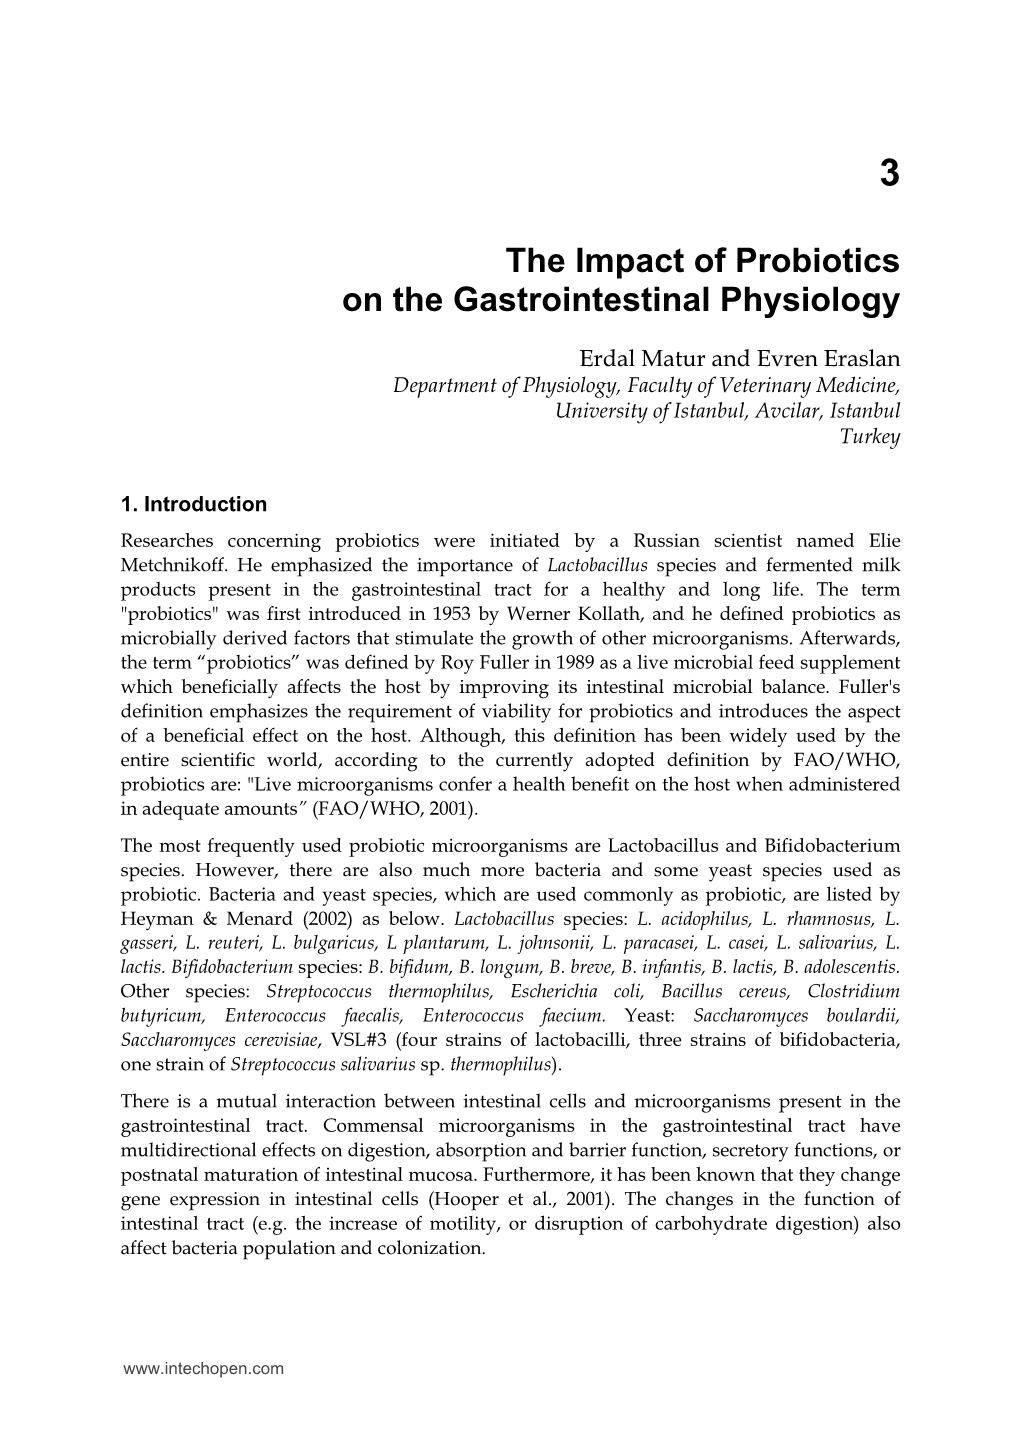 The Impact of Probiotics on the Gastrointestinal Physiology